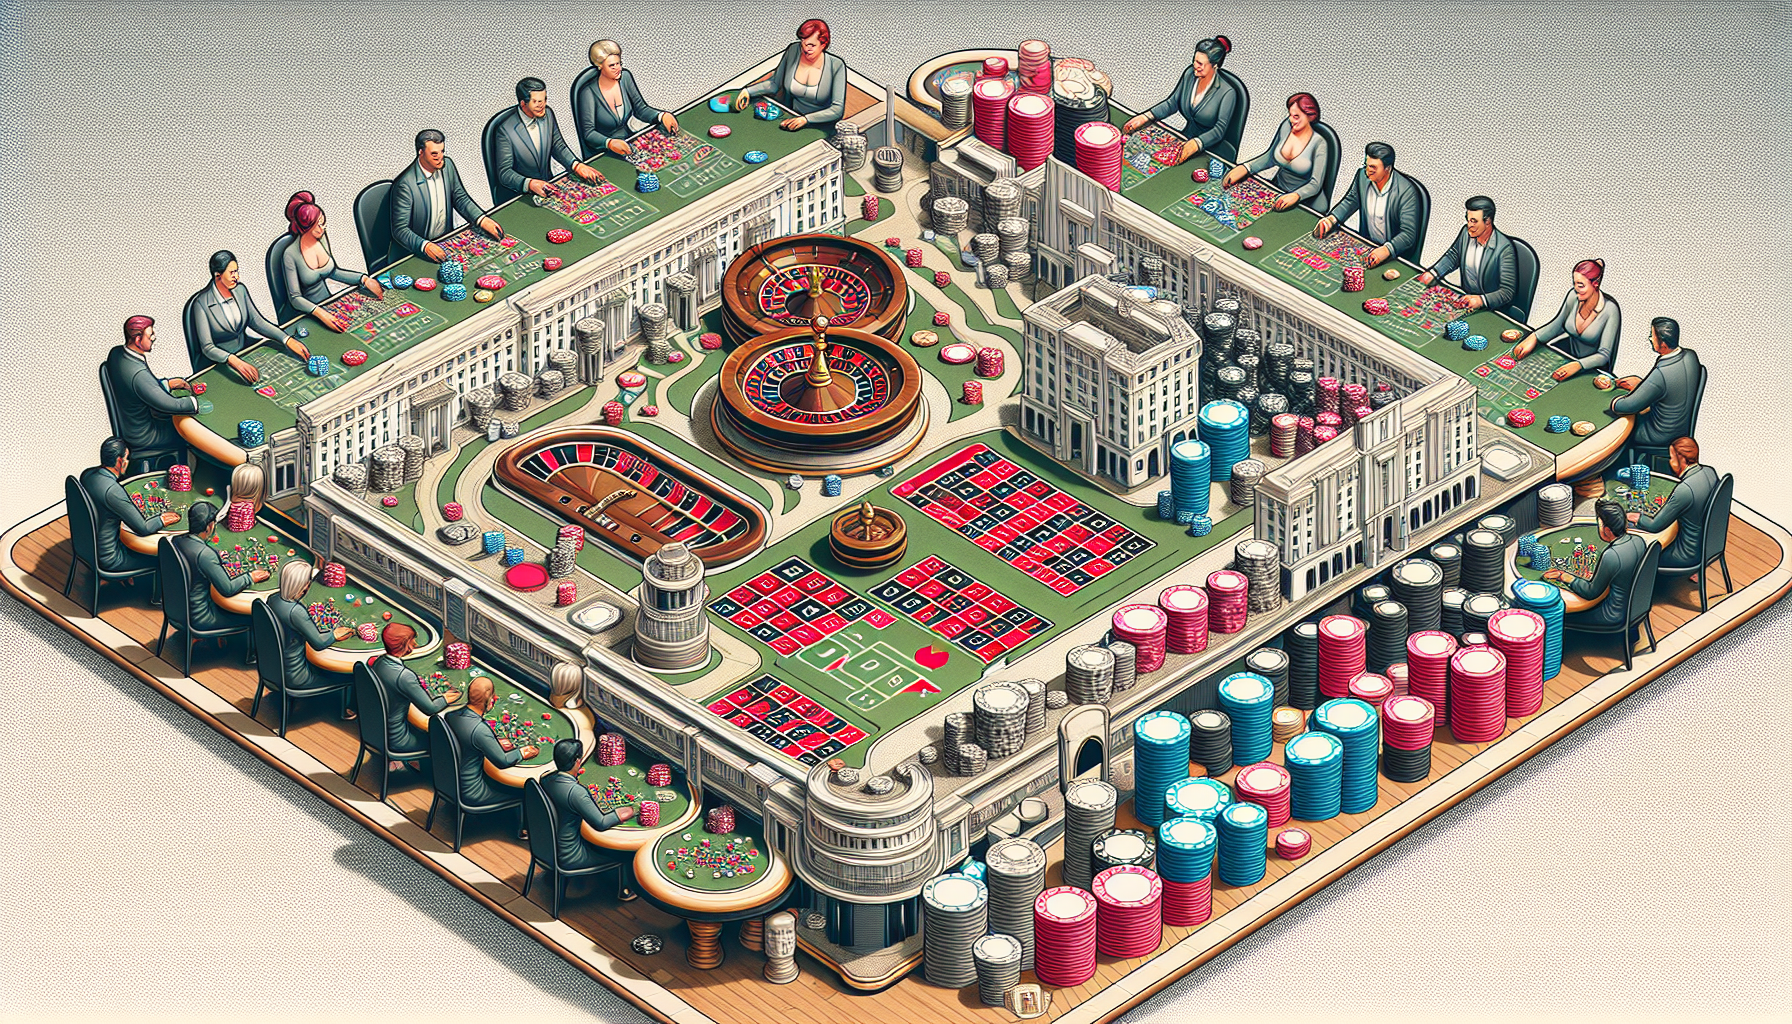 Illustration of a strategy board game with casino elements